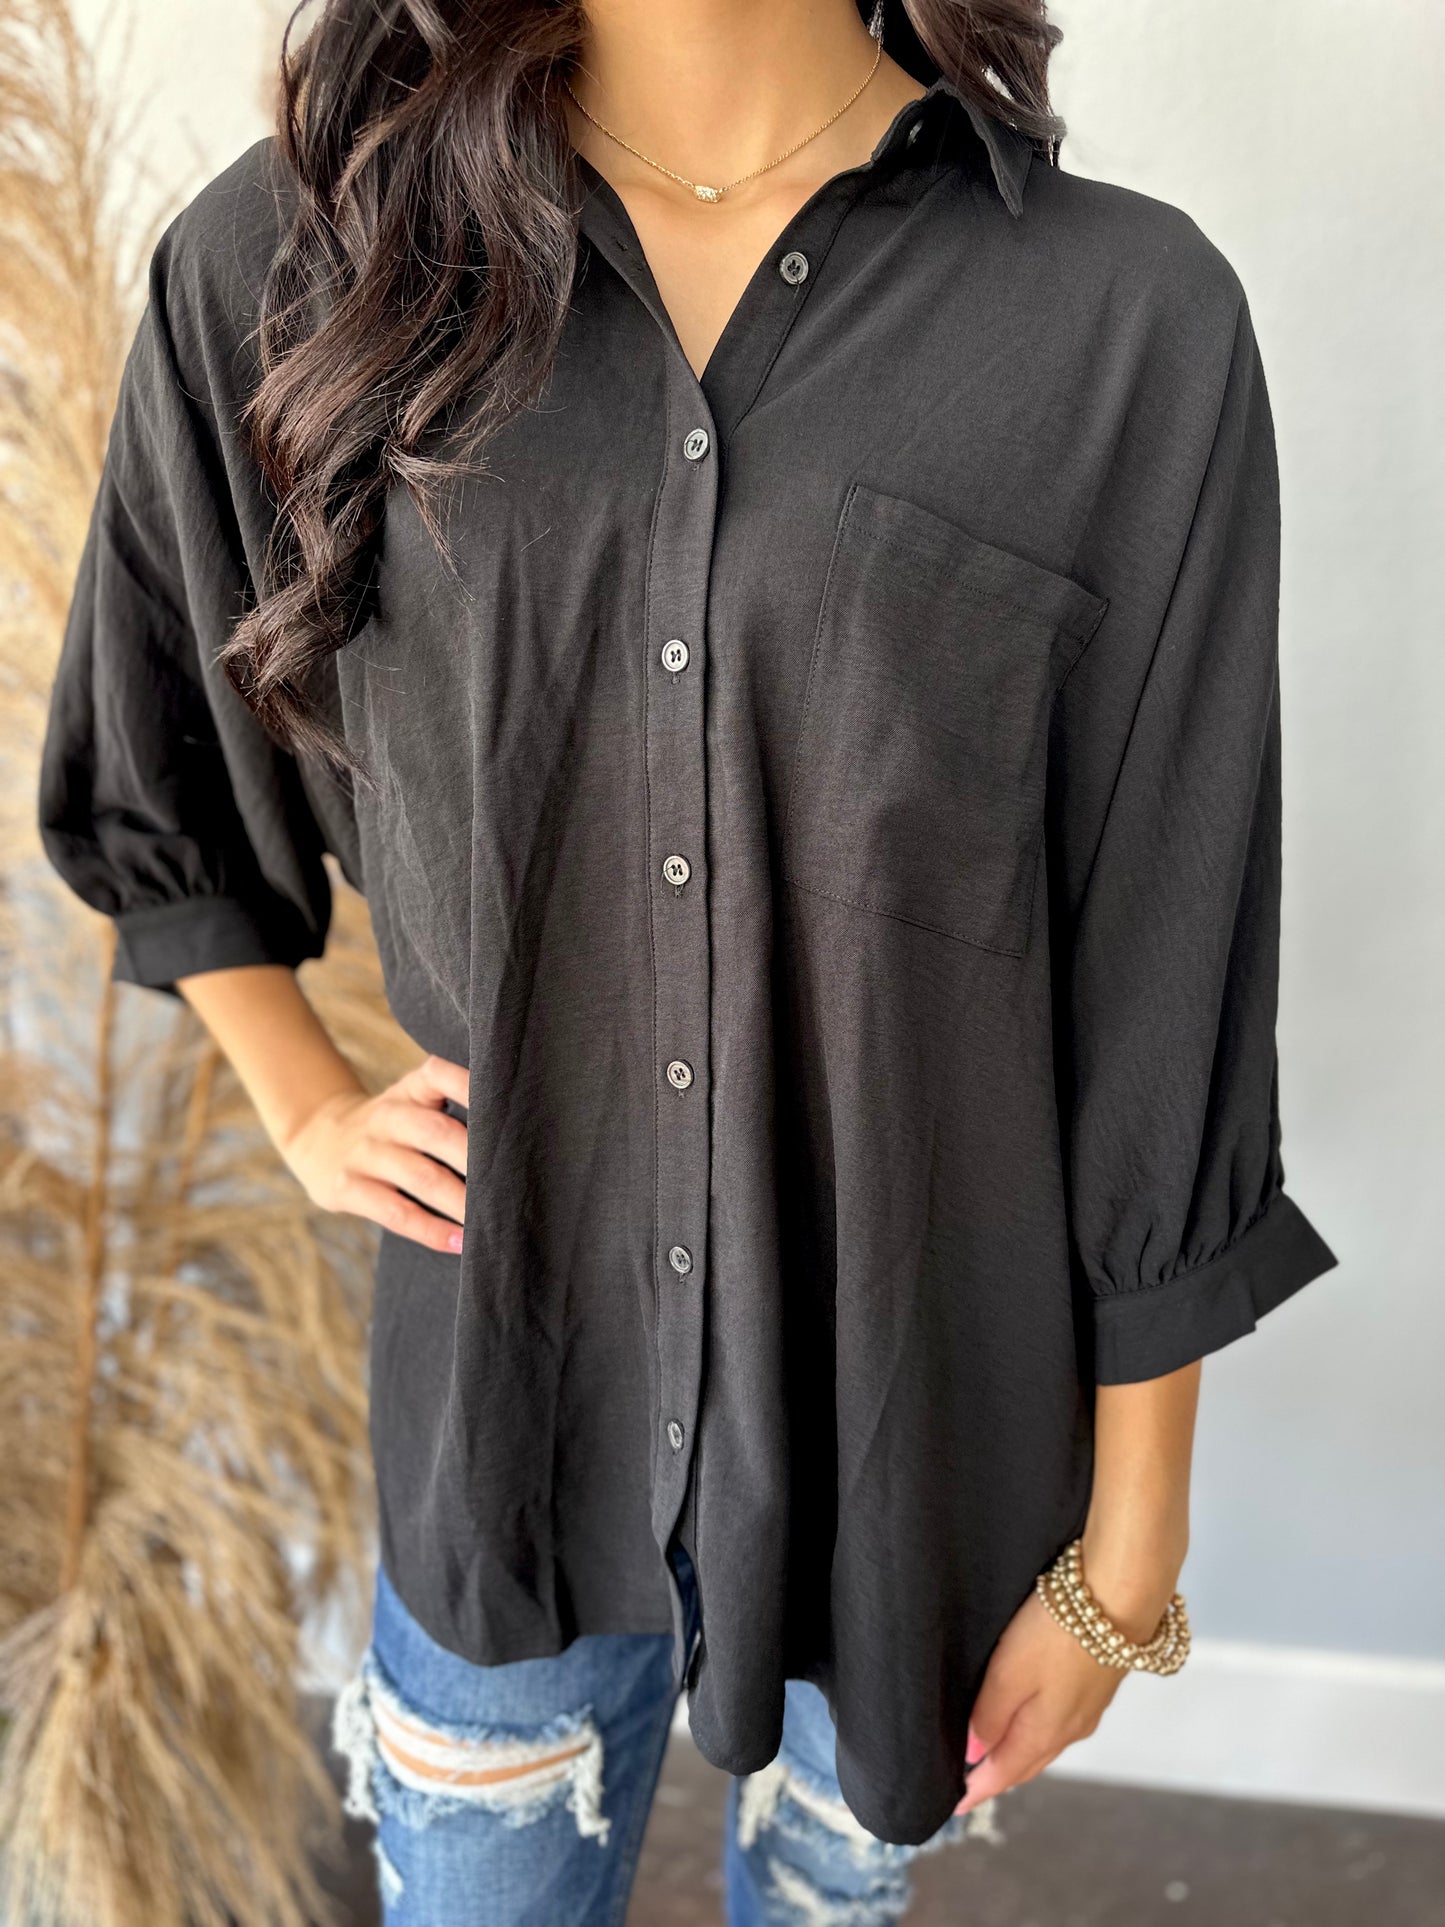 BLACK OVERSIZED 3/4 SLEEVE BUTTON UP TOP